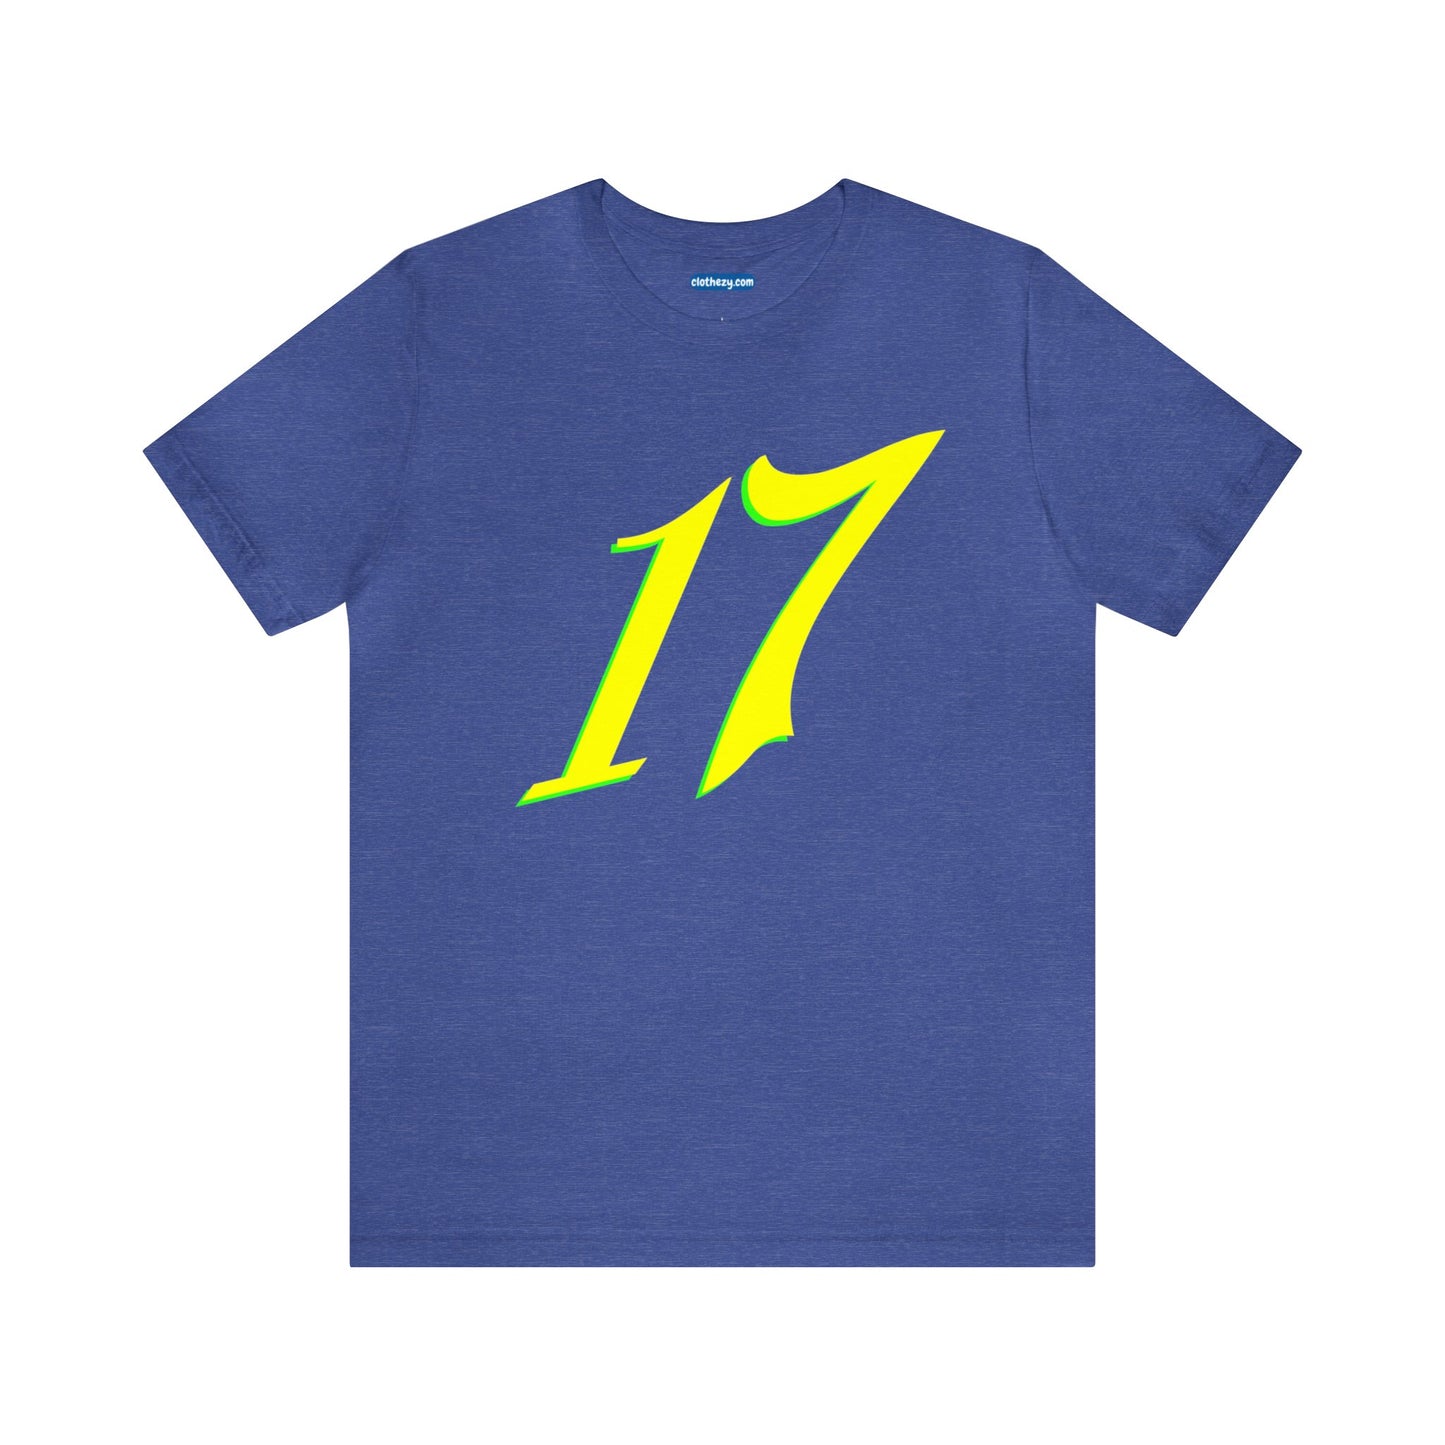 Number 17 Design - Soft Cotton Tee for birthdays and celebrations, Gift for friends and family, Multiple Options by clothezy.com in Navy Size Small - Buy Now